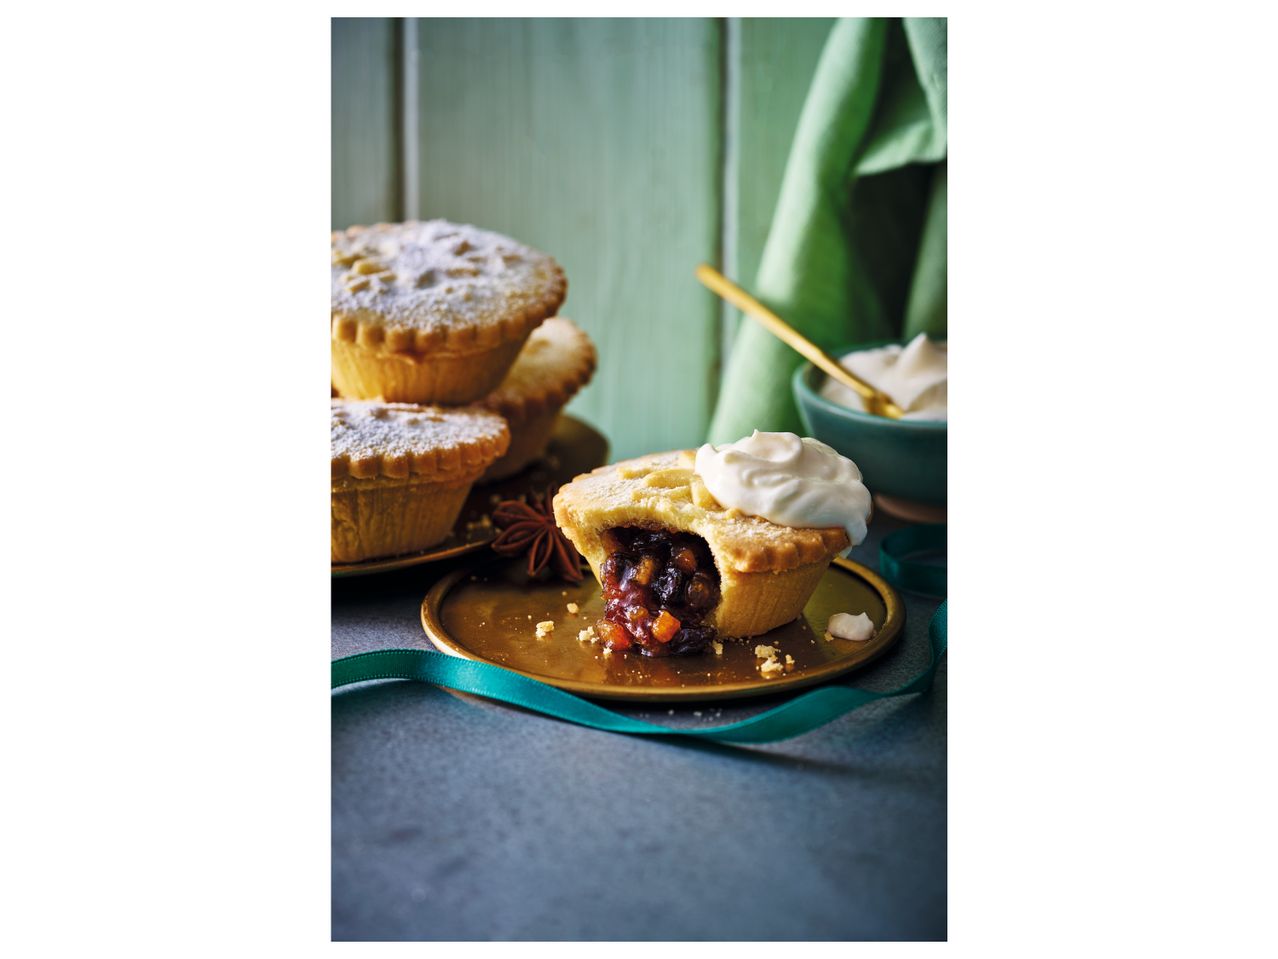 Go to full screen view: 6 All Butter Mince Pies - Image 1